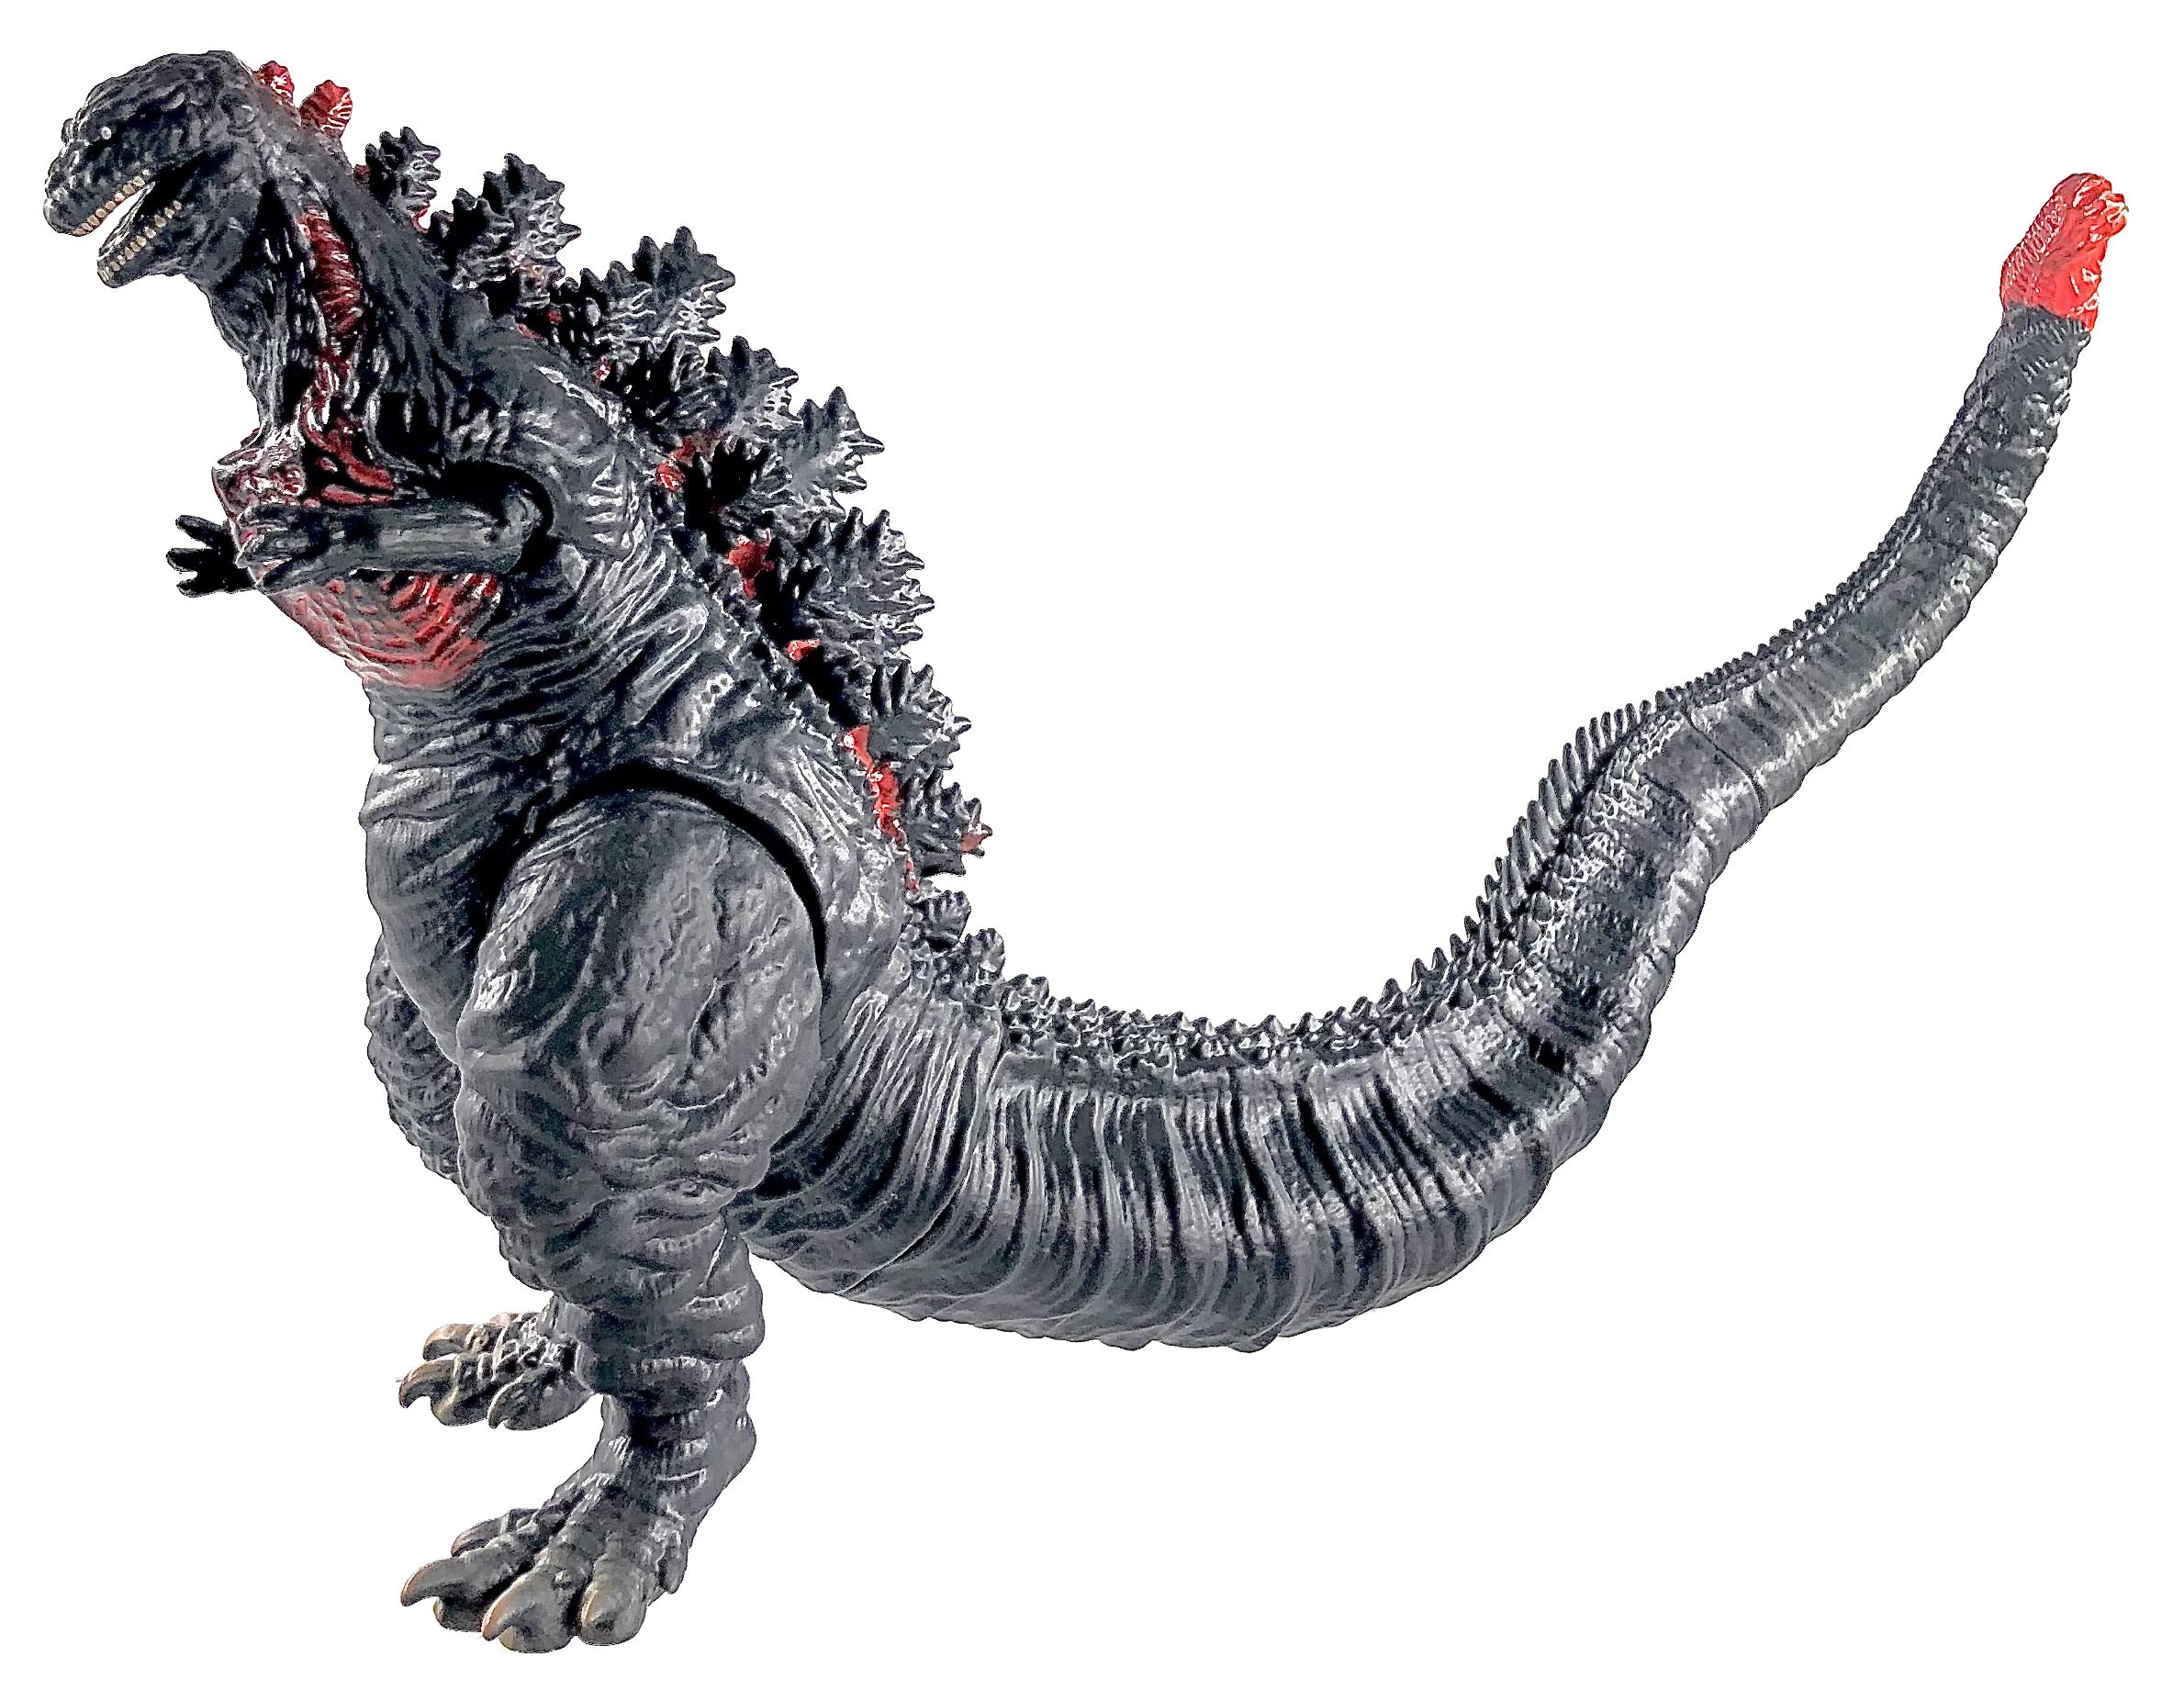 Twcare shin godzilla movie series movable joints action figures soft vinyl carry bag